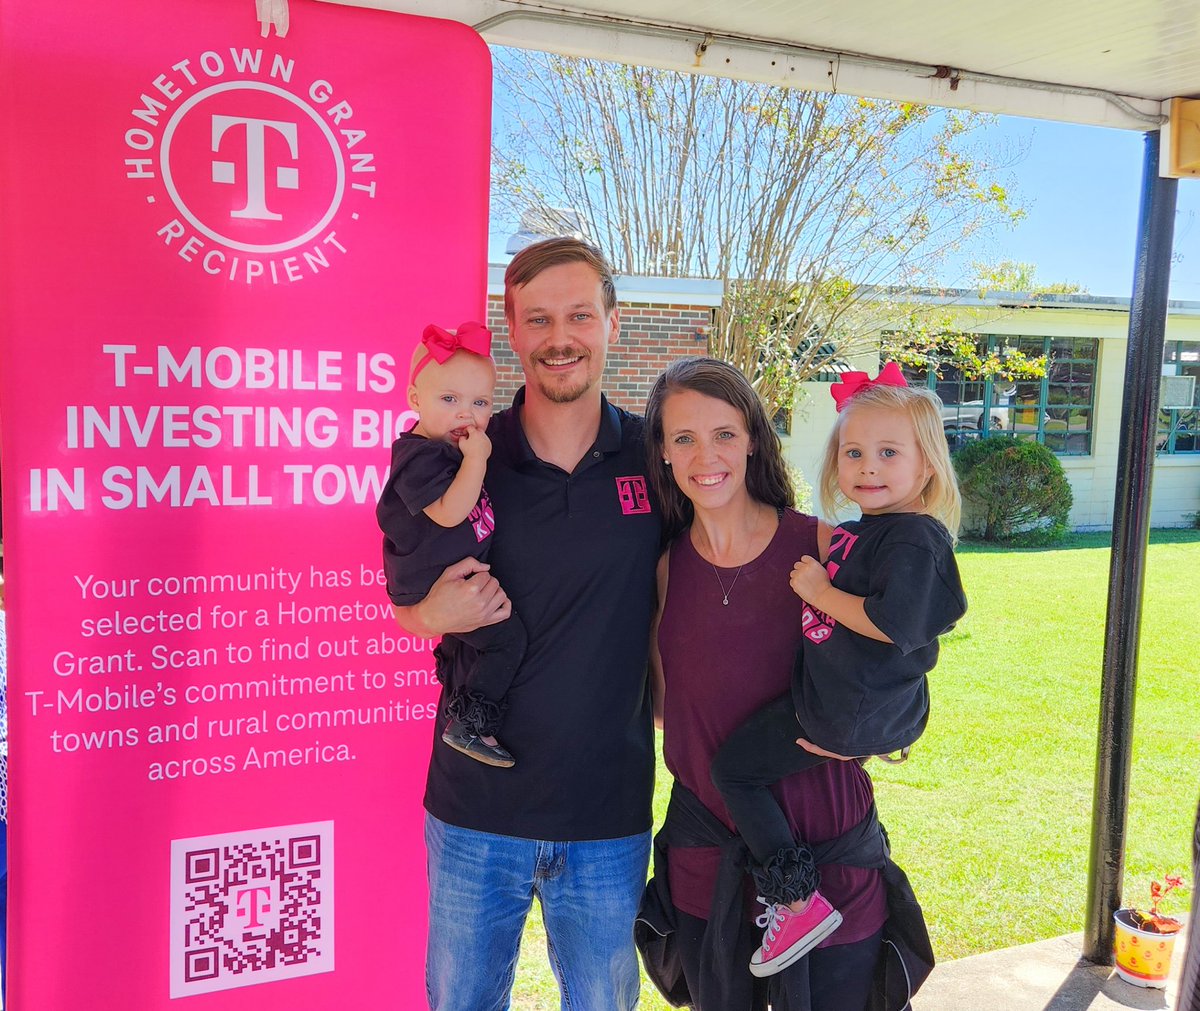 Today will be forever marked at the top of my list of career moments. What a phenomenal honor being able to speak on behalf of @TMobile and present the #HometownGrants to my very own hometown of Leeds Alabama! Having my wife and 2 youngest daughters there made it even better!